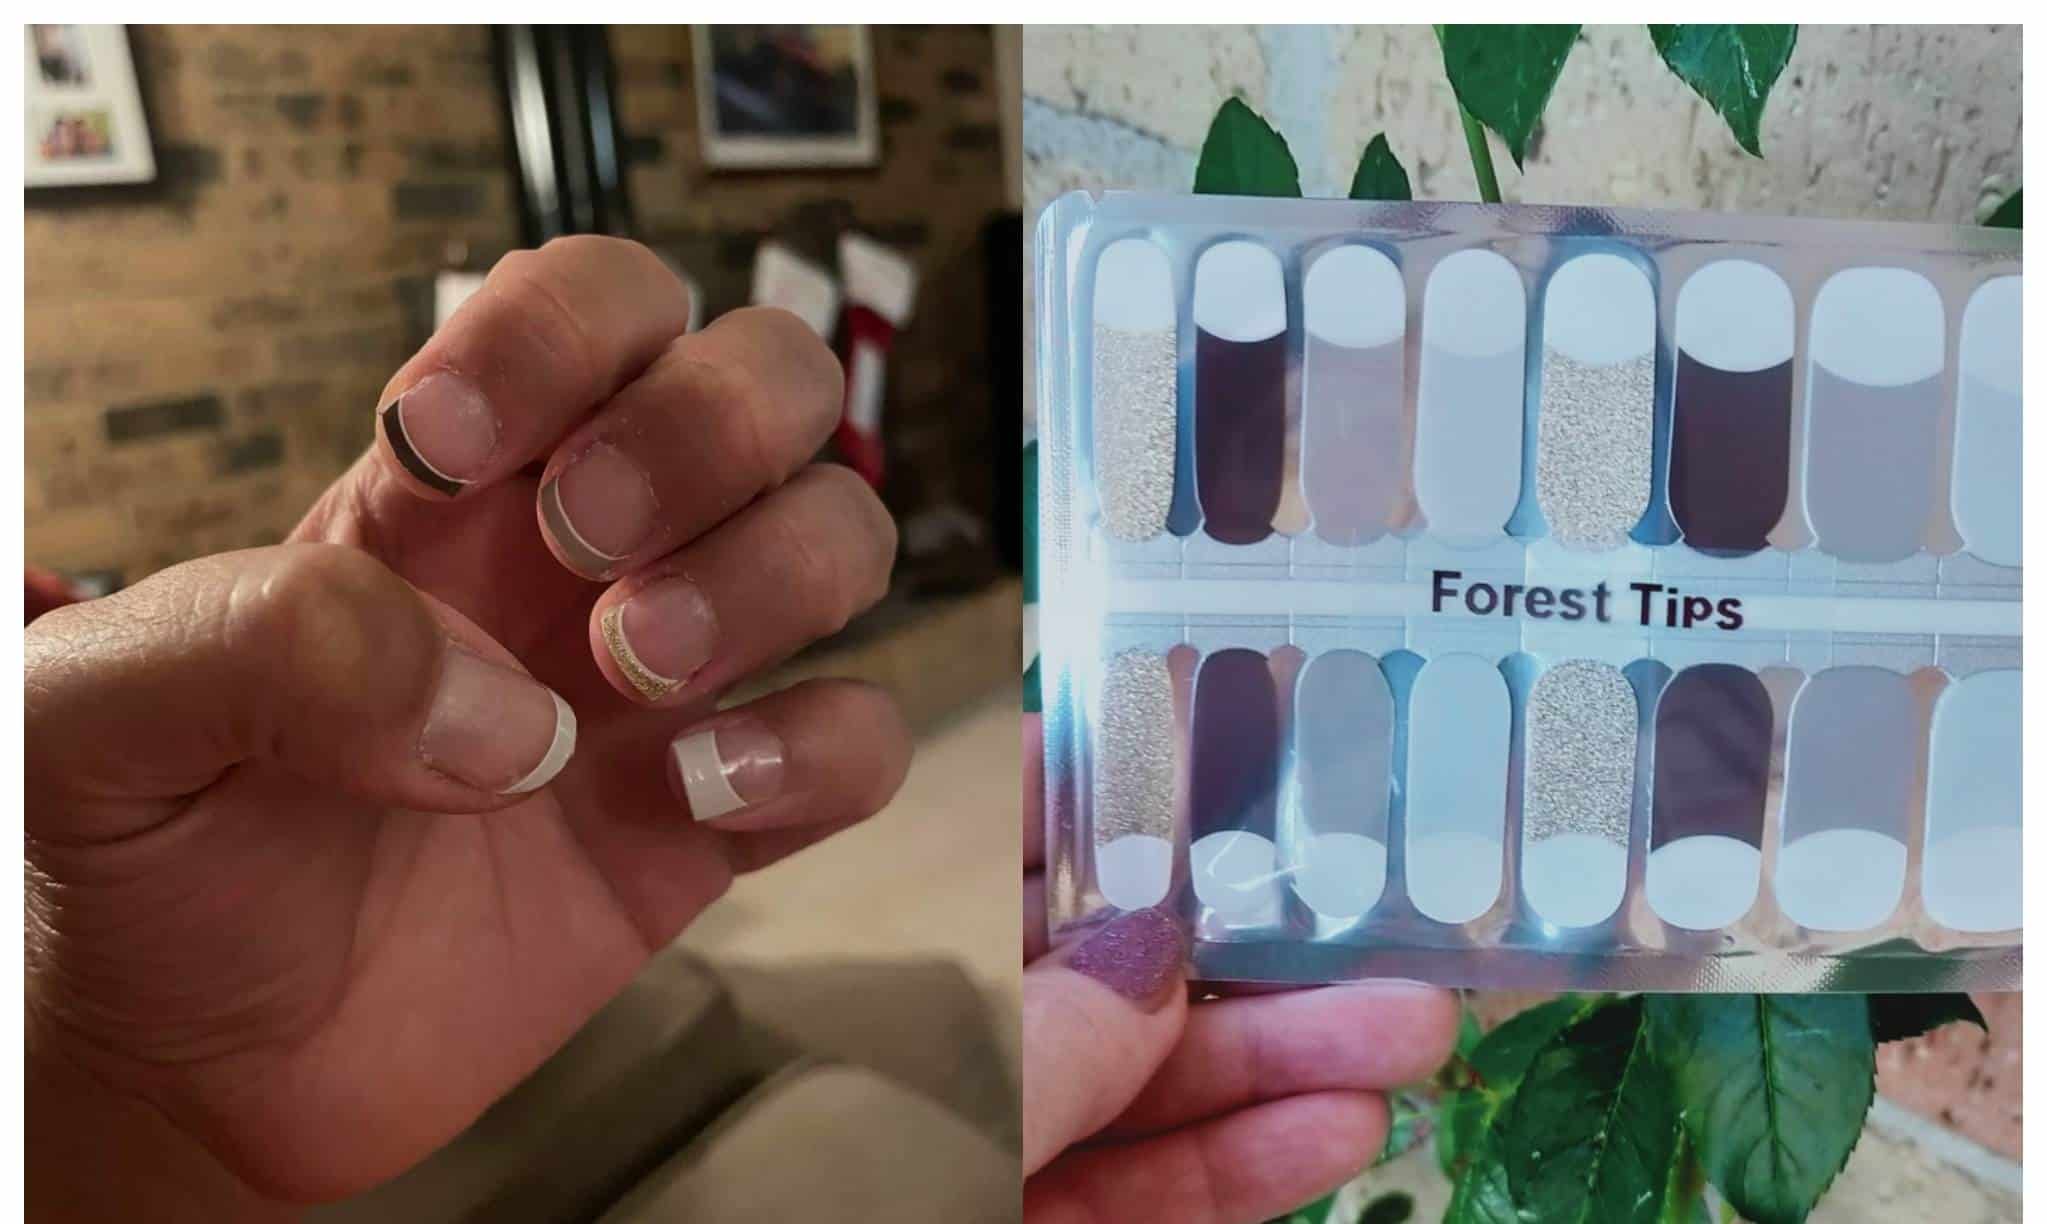 Bindy's Forest Tips Nail Polish Wrap